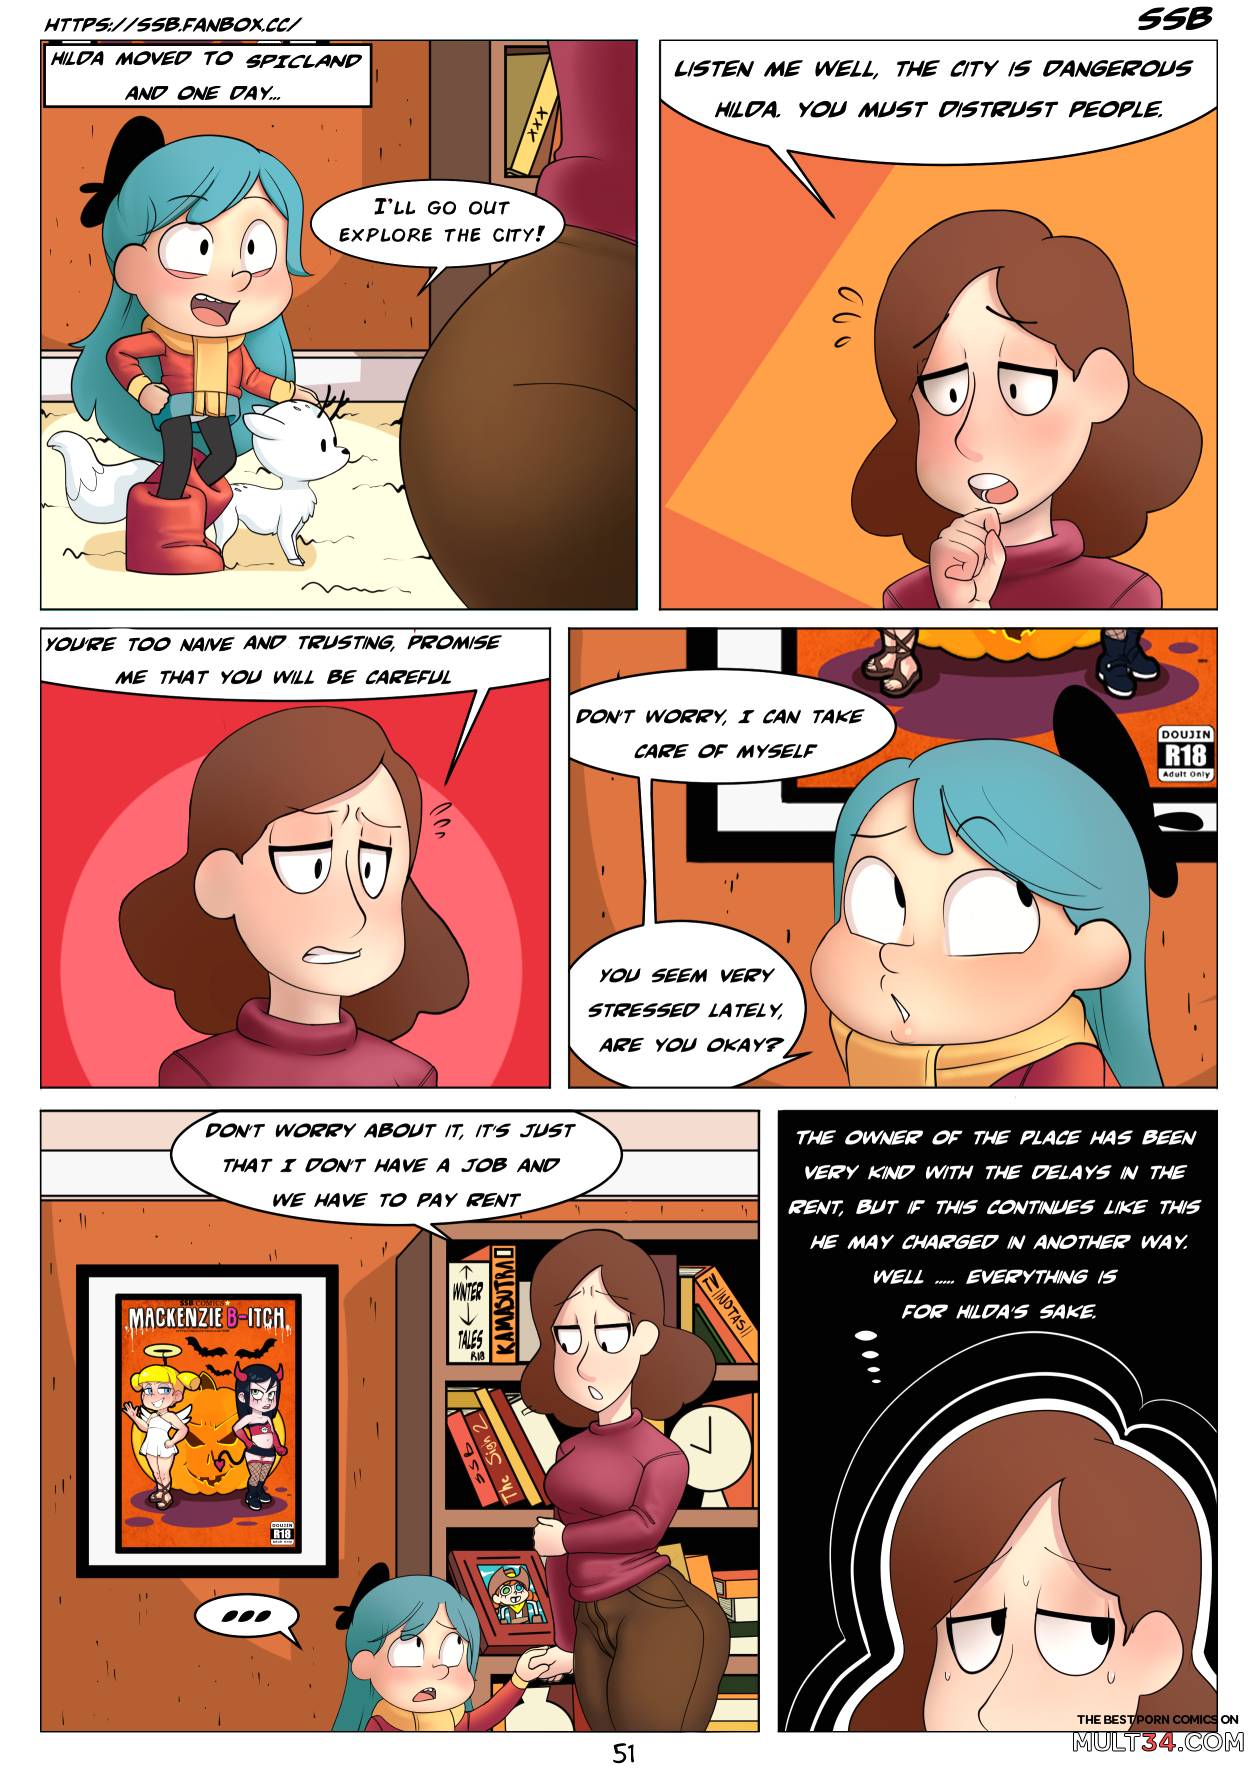 Spring is in the Air page 52